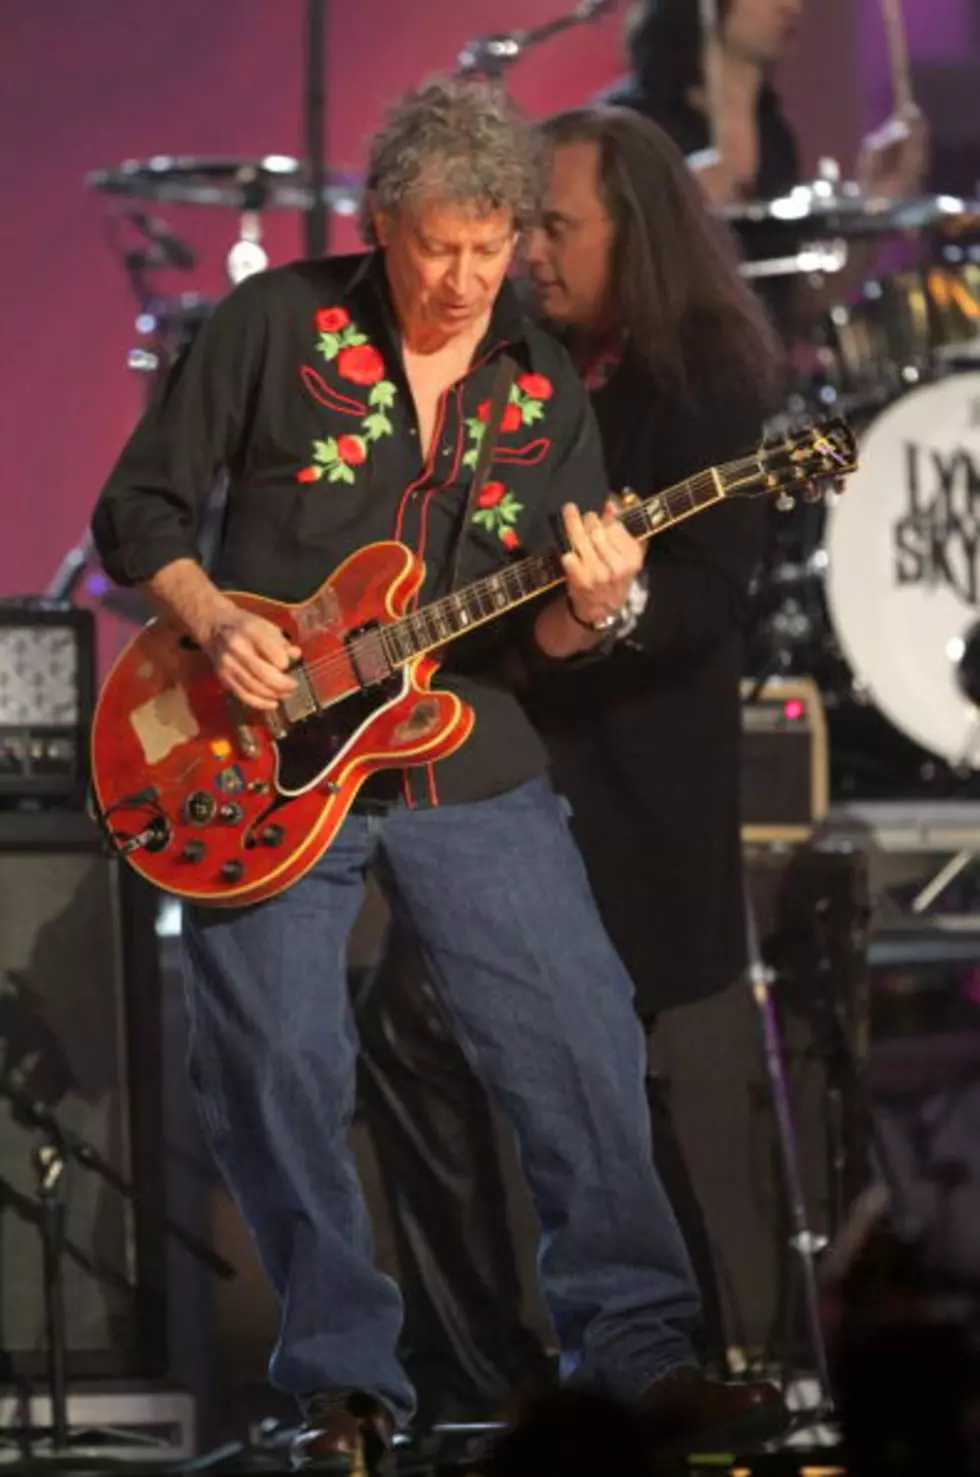 The Scheduled Lineup For Saturday’s Bayfront Blues Festival Features Headliner Elvin Bishop